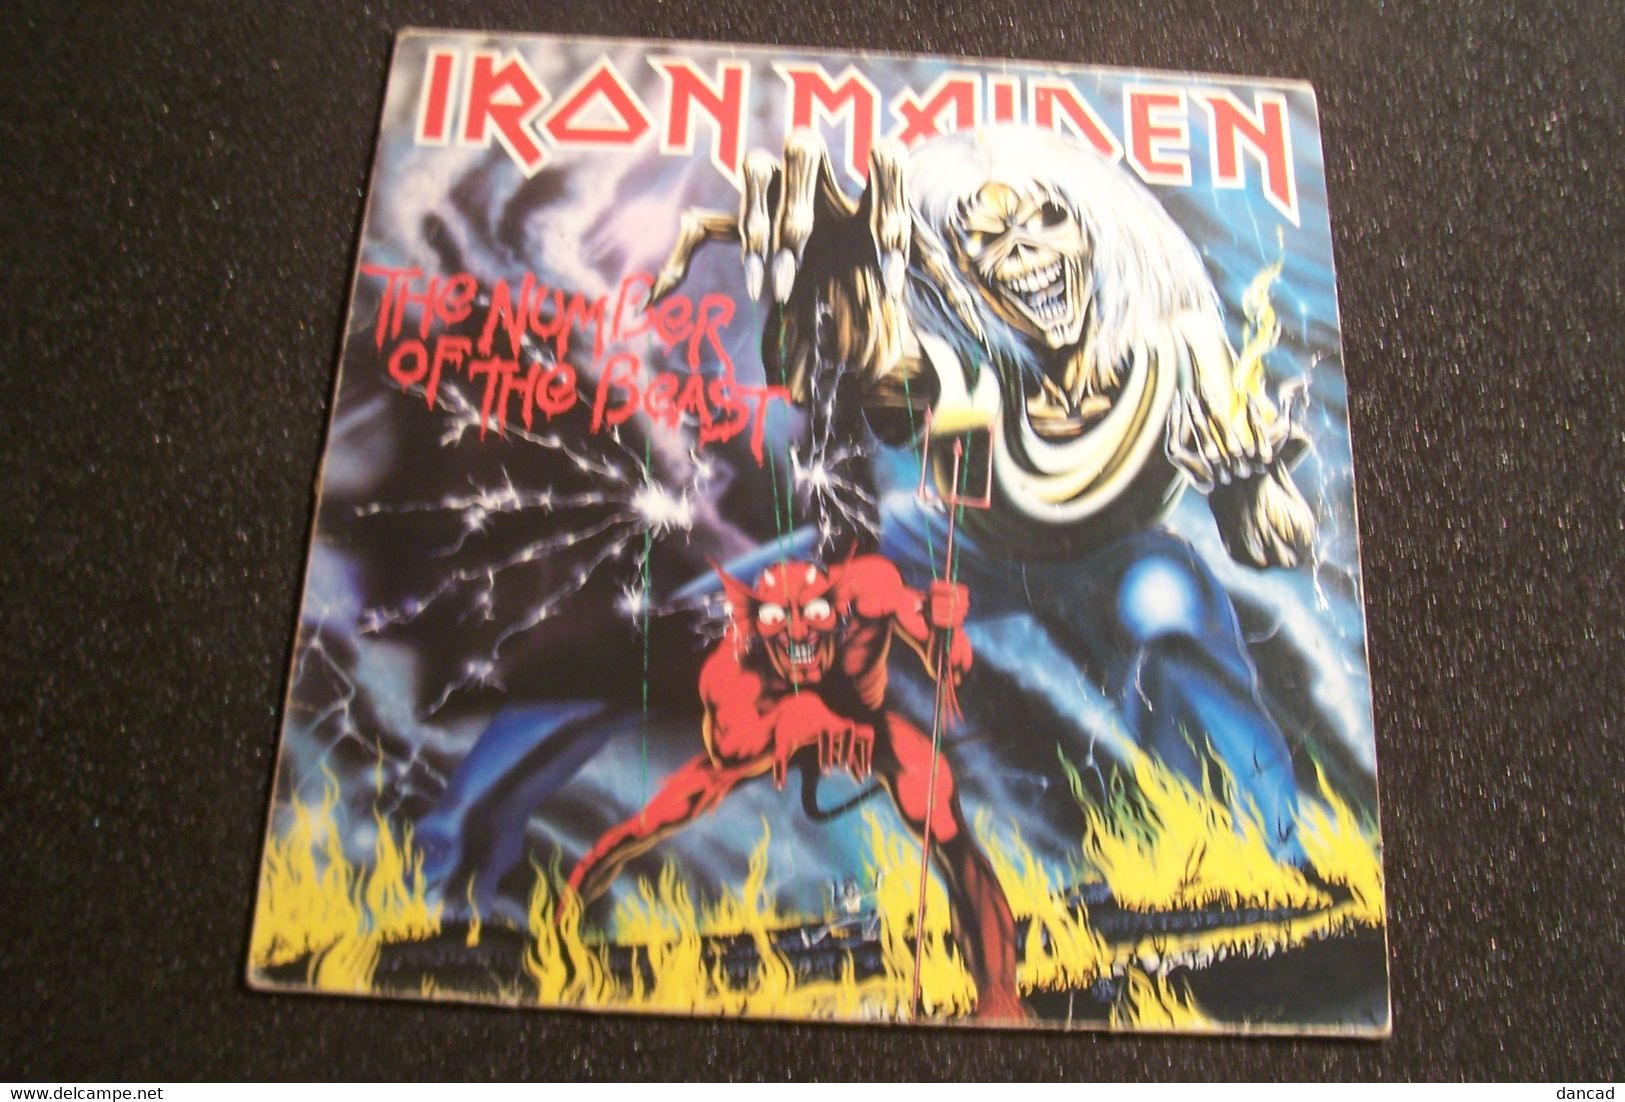 IRON  MAIDEN  - The Number Of The Beast  - DISQUE  33 Tours  - ( Année 1982 ) - - Hard Rock En Metal